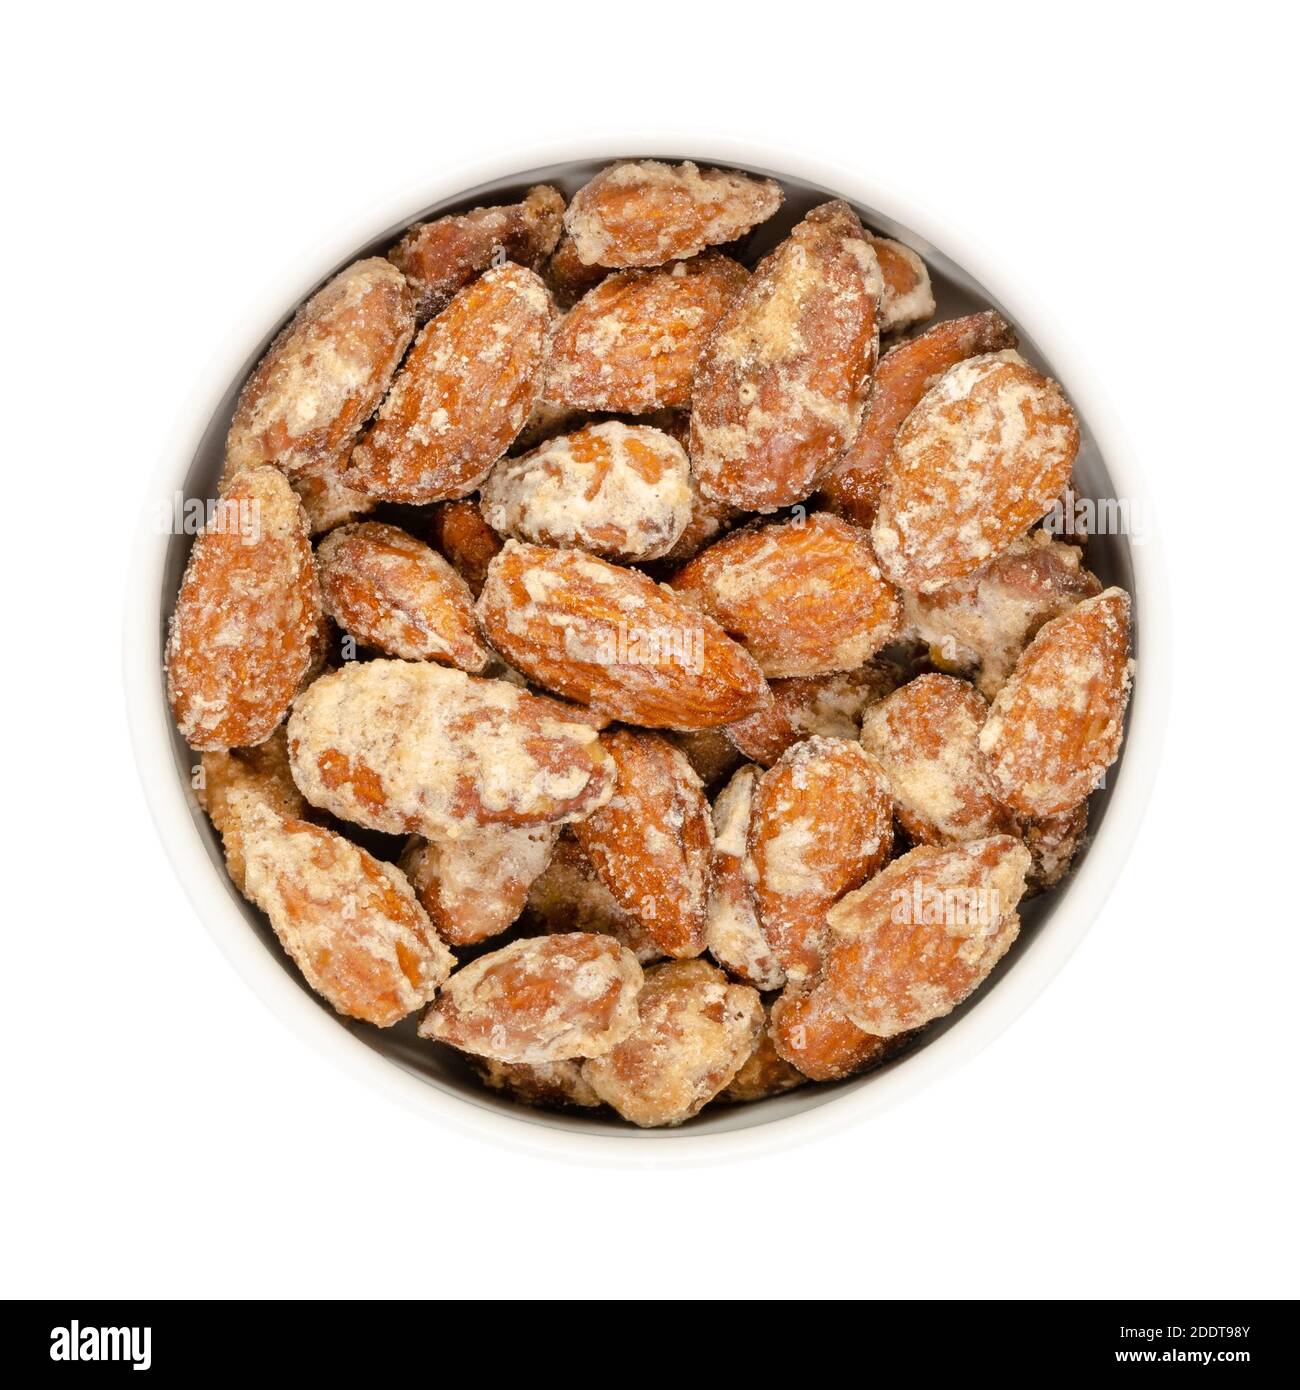 Candied almonds in a white bowl. Homemade, in a special way cooked almonds, whole nuts coated in crunchy sugar. Sold at Christmas markets. Stock Photo